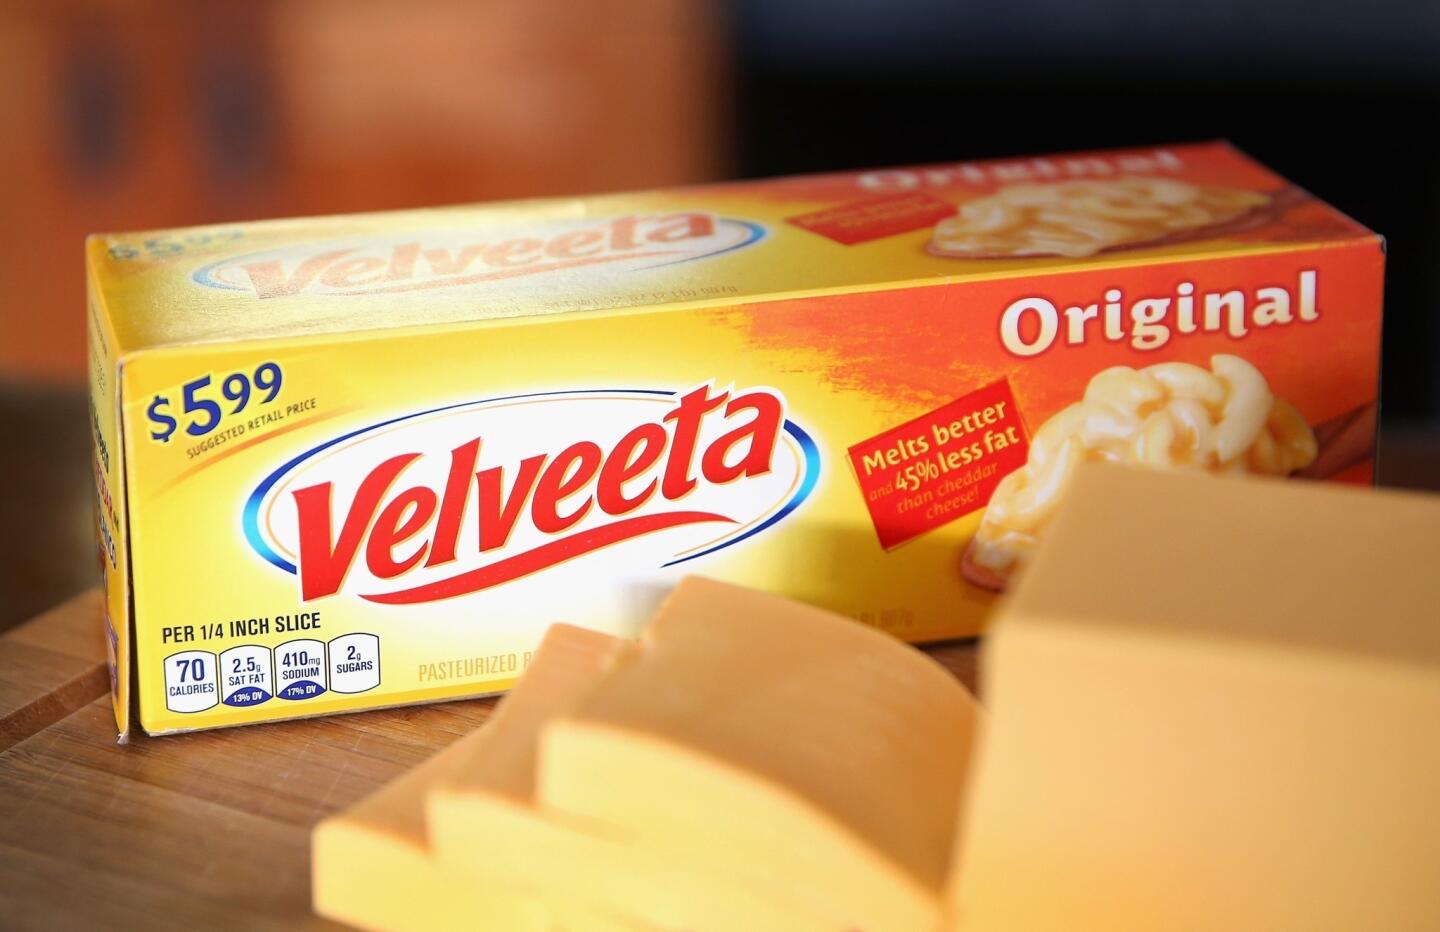 Kraft is recalling a batch of Velveeta cheese shipped to Walmart in the Midwest because it doesn't contain enough of a specific preservative and can spoil too fast, potentially causing a food borne illness, the company said June 19. The cheese product was shipped to three Walmart distribution centers and may have been redistributed to stores in as many as 12 states, including Illinois. The recall includes one batch made on a single manufacturing line over a few hours of production. The recalled product is in 32-ounce containers. They will have a "Best Used By" date of Dec. 17, 2014 and consumer package code between 09:34 and 13:15 next to the date. Consumers who have bought the product should return them to the store for a full refund, or call Kraft Foods Consumer Relations at (800) 310-3704 between 8 a.m. and 5 p.m. Central time. The affected products may have been shipped to Walmart stores in Colorado, Illinois, Indiana, Iowa, Kansas, Michigan, Minnesota, Nebraska, North Dakota, Ohio, South Dakota and Wisconsin. These products were not shipped outside of the U.S.